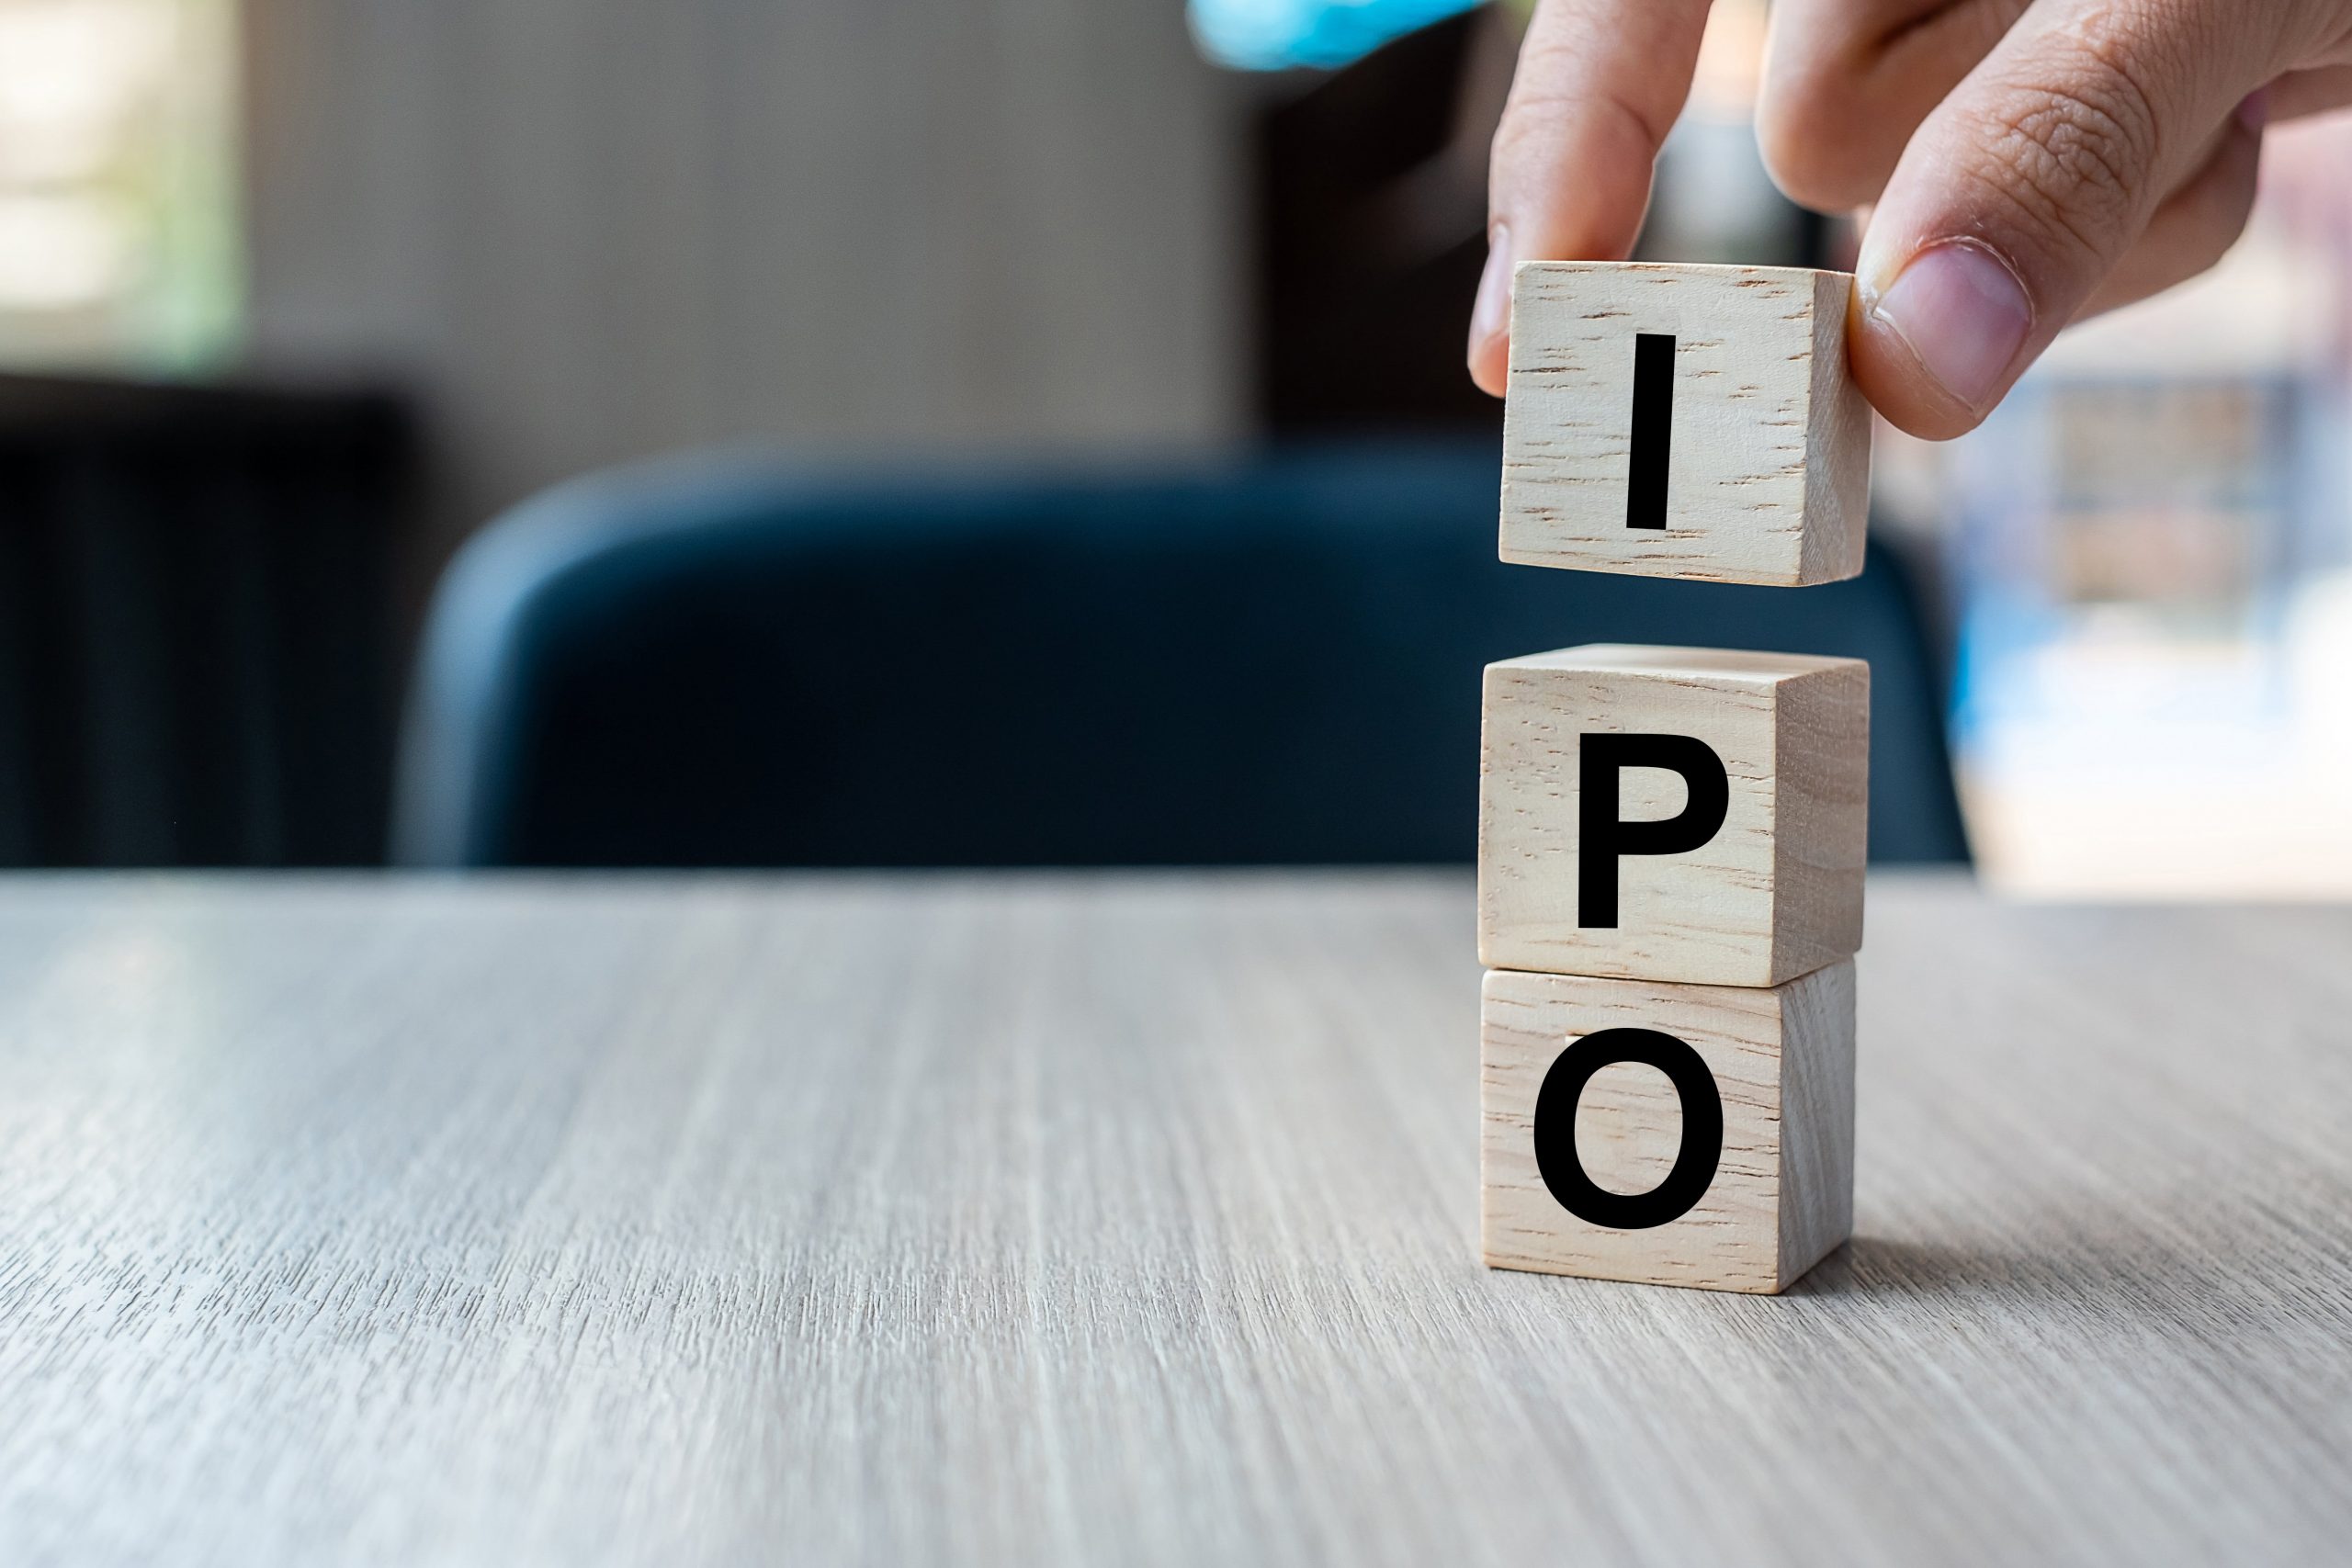 Conditions for IPO under Vietnamese Law